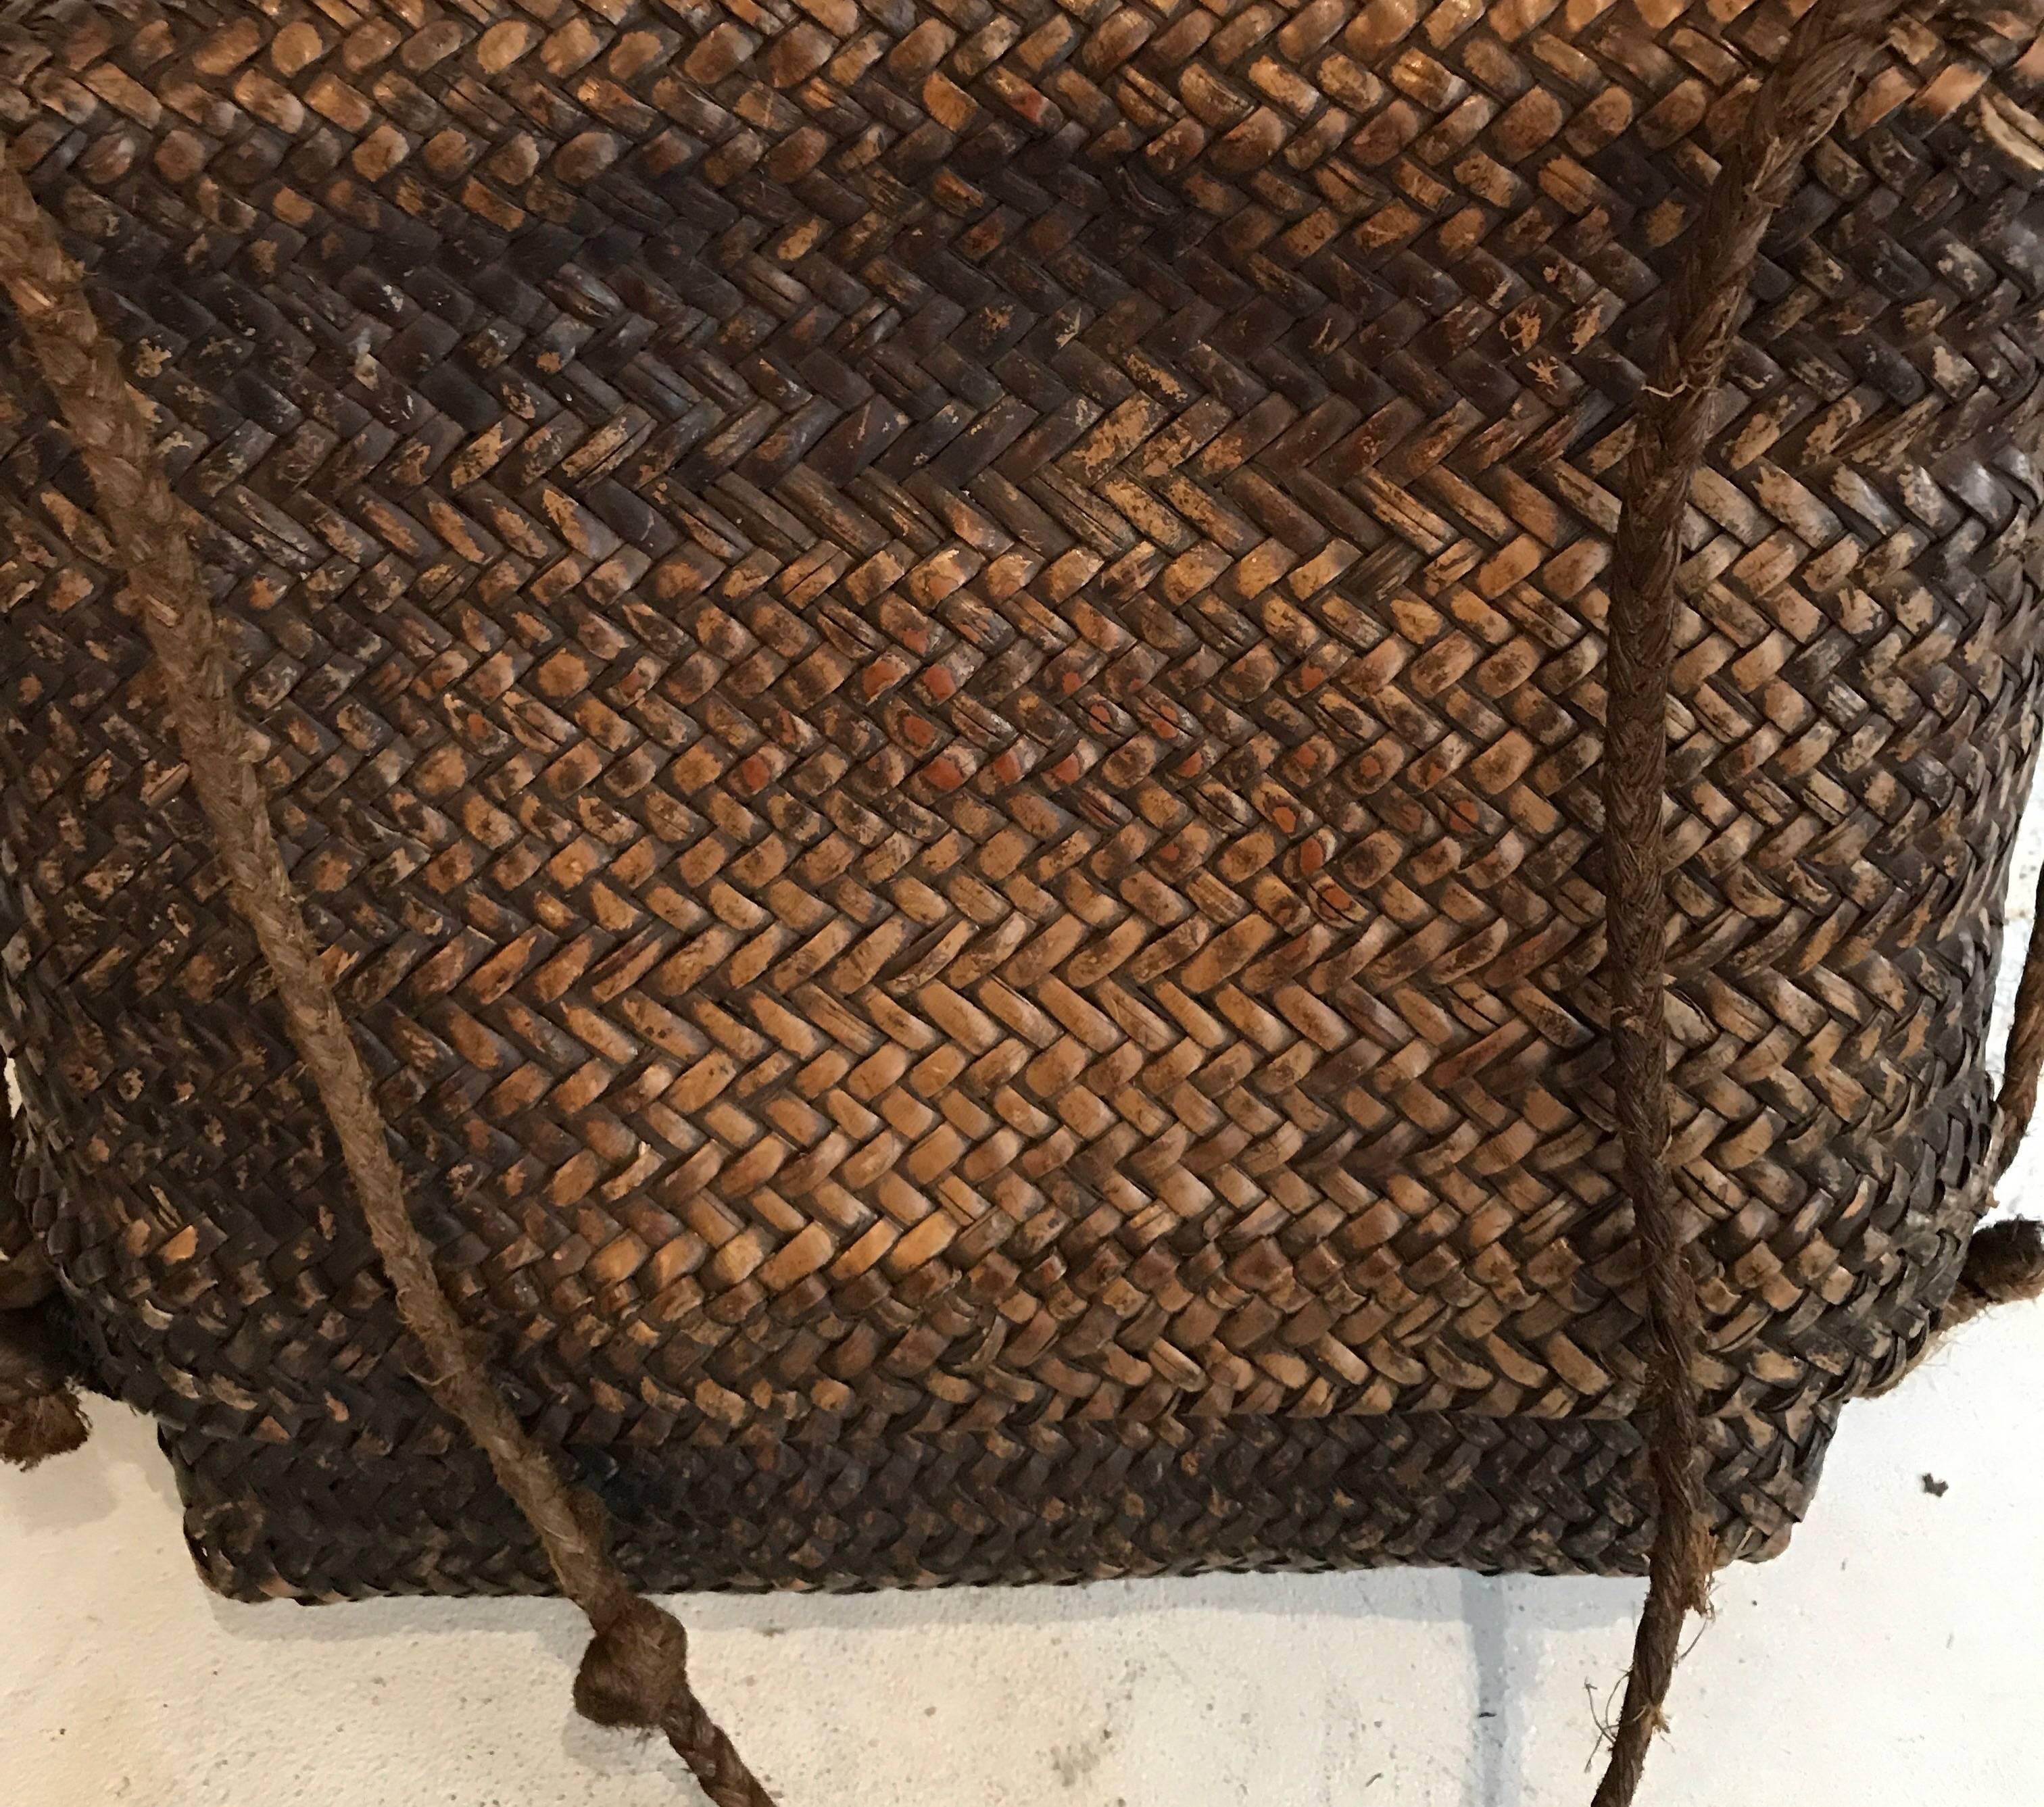 Early 20th century woven Thai basket 
Beautiful patina 


Dimensions: Top is 10.5 in H x 14 in W
 Bottom is 10 in H x 13.5 W
 Total for basket is 12.5 in H x 14 in W x 4.5 in D with handle 28 in H.